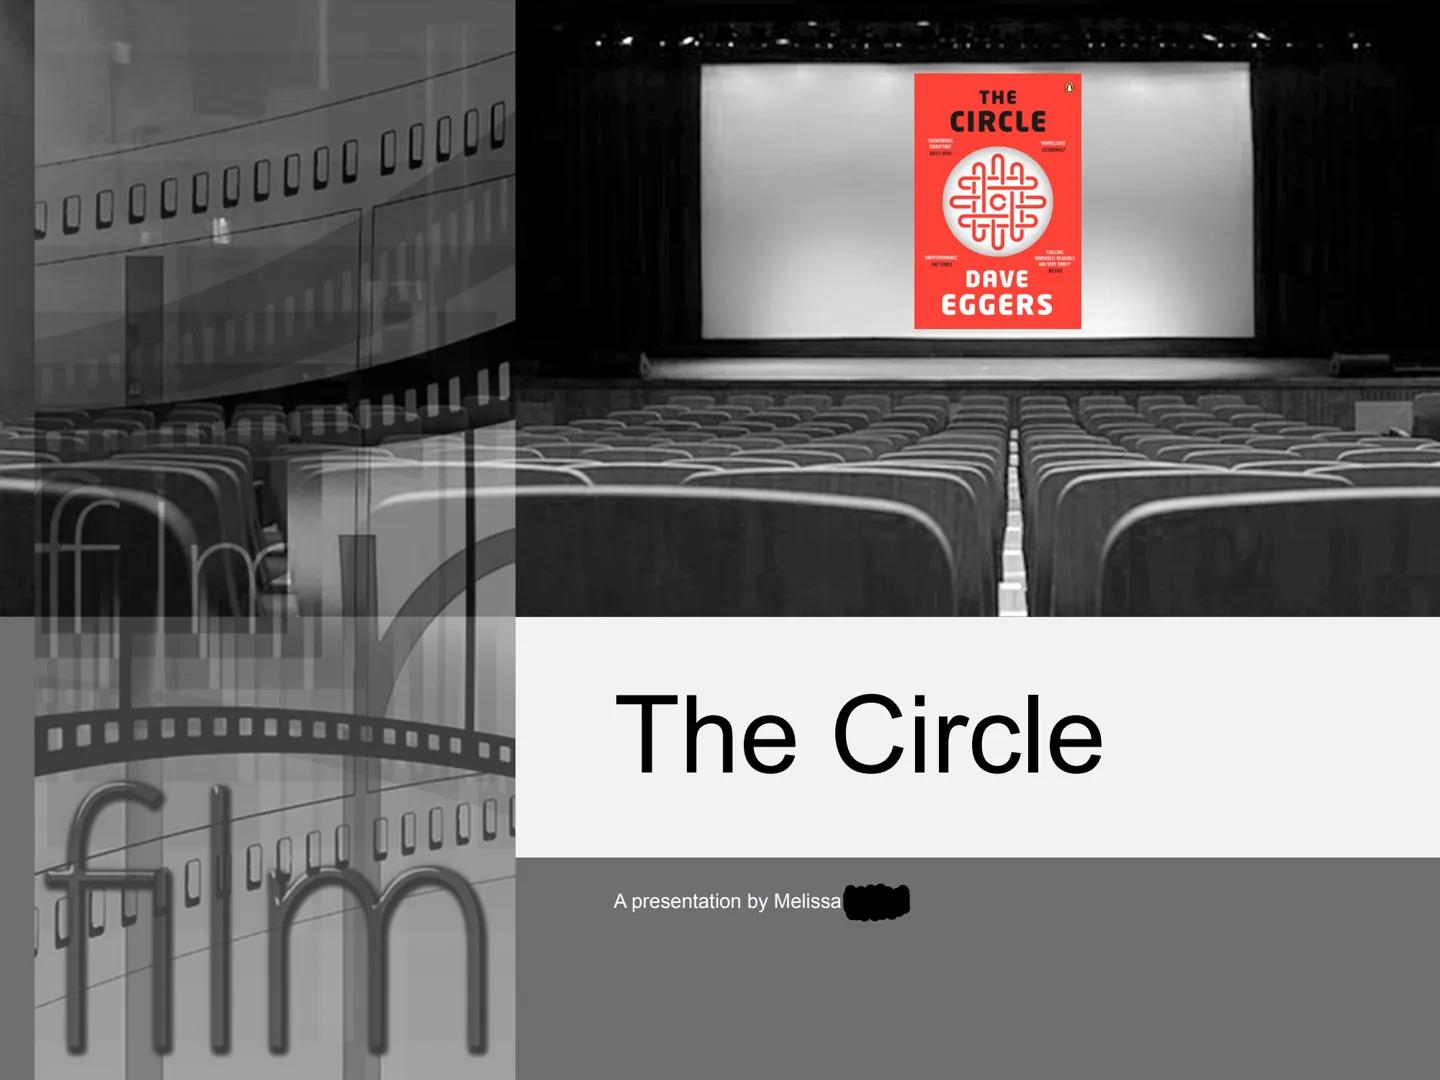 700000000 00000
film
0 0000 000000
THE
CIRCLE
A presentation by Melissa
DAVE
EGGERS
The Circle 01
02
03
04
CONTENT
General facts
What is the